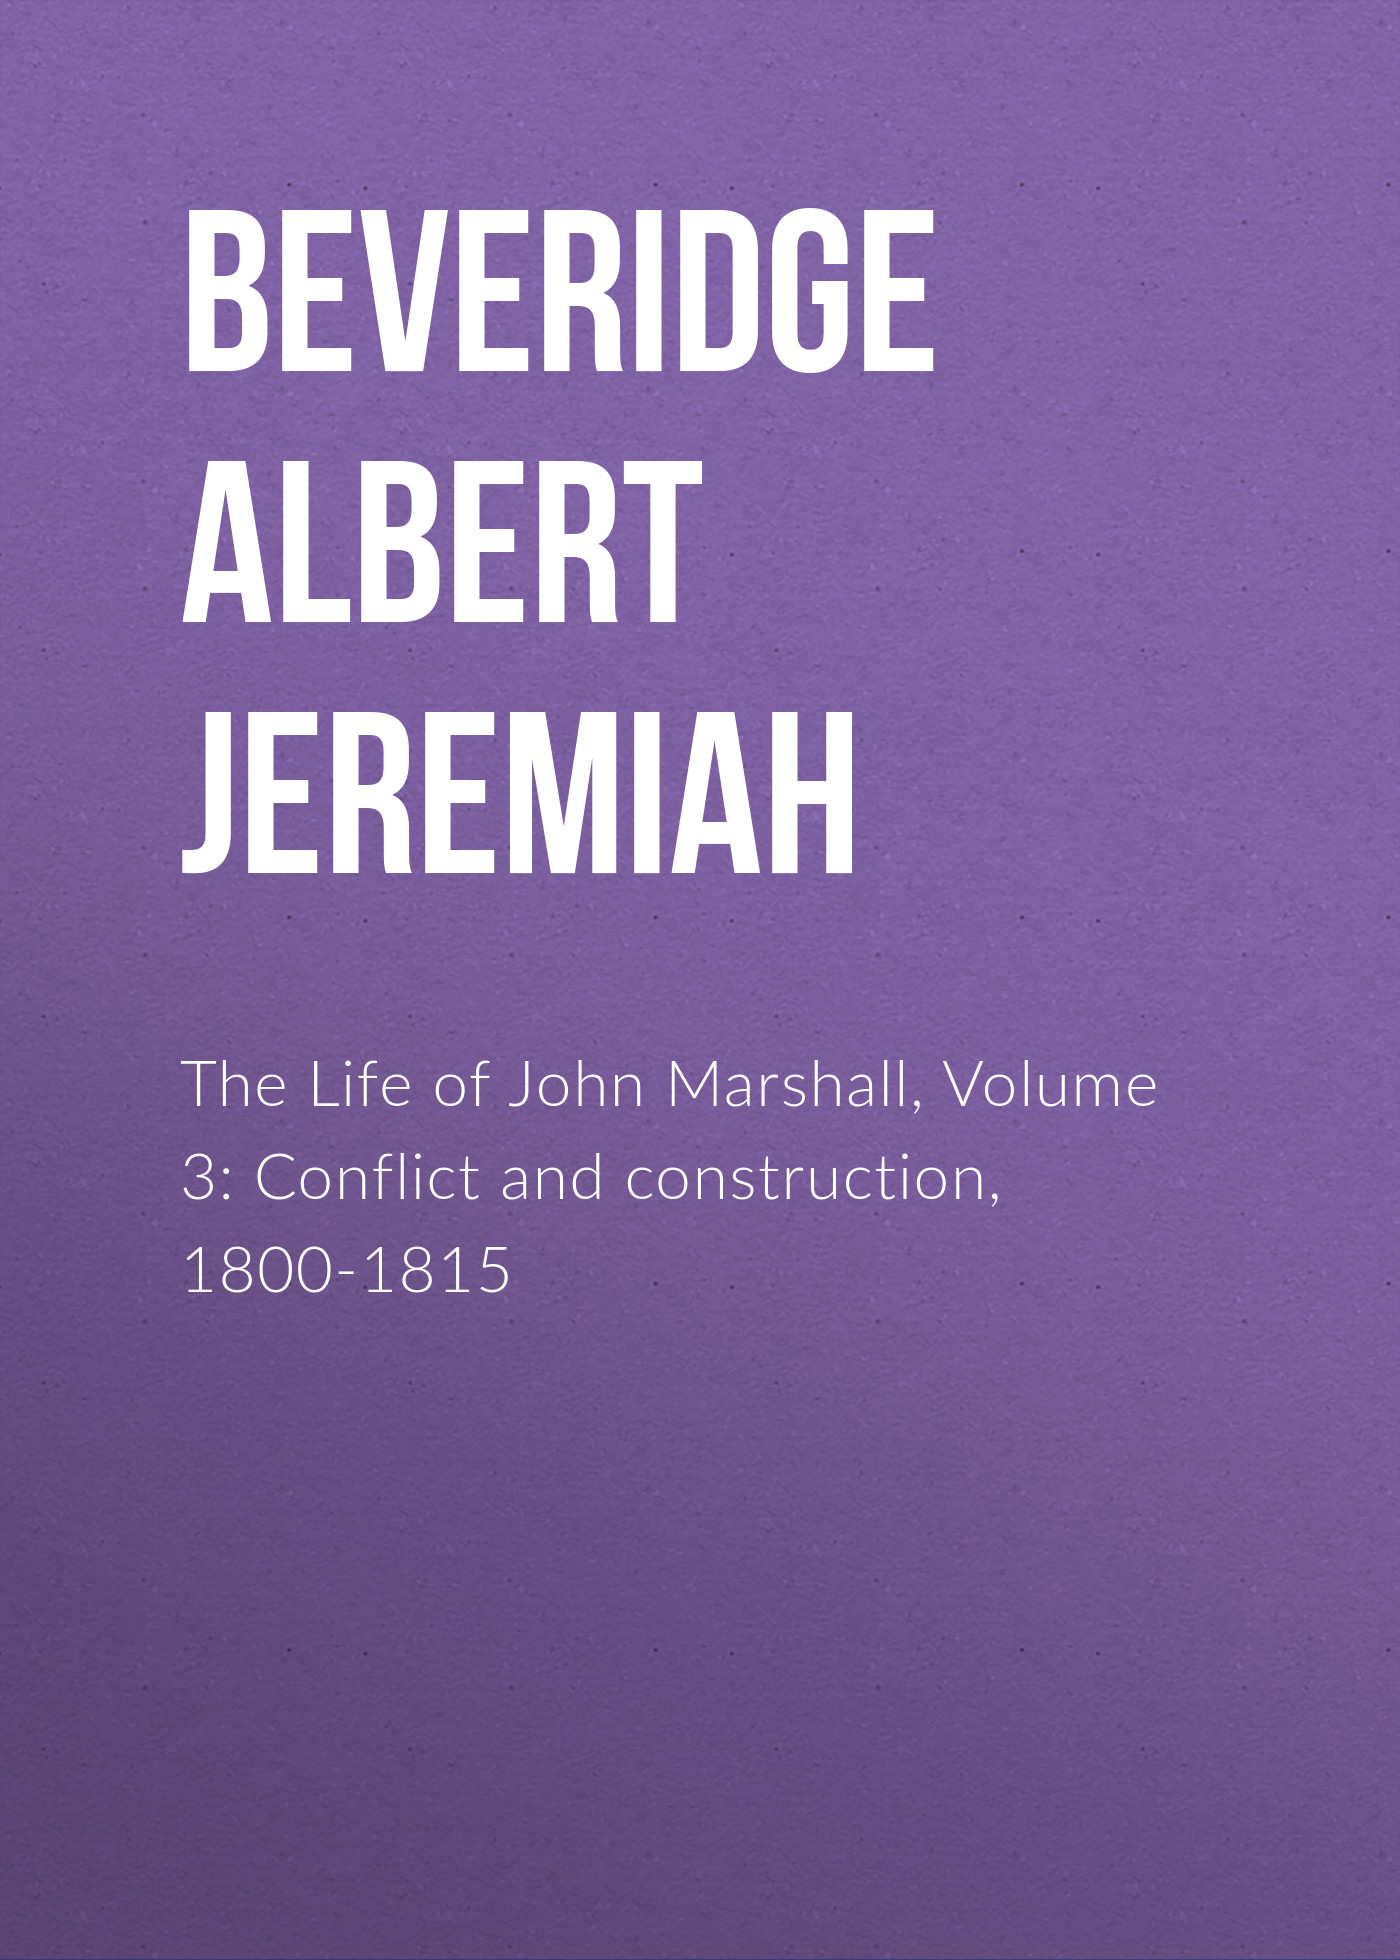 The Life of John Marshall, Volume 3: Conflict and construction, 1800-1815